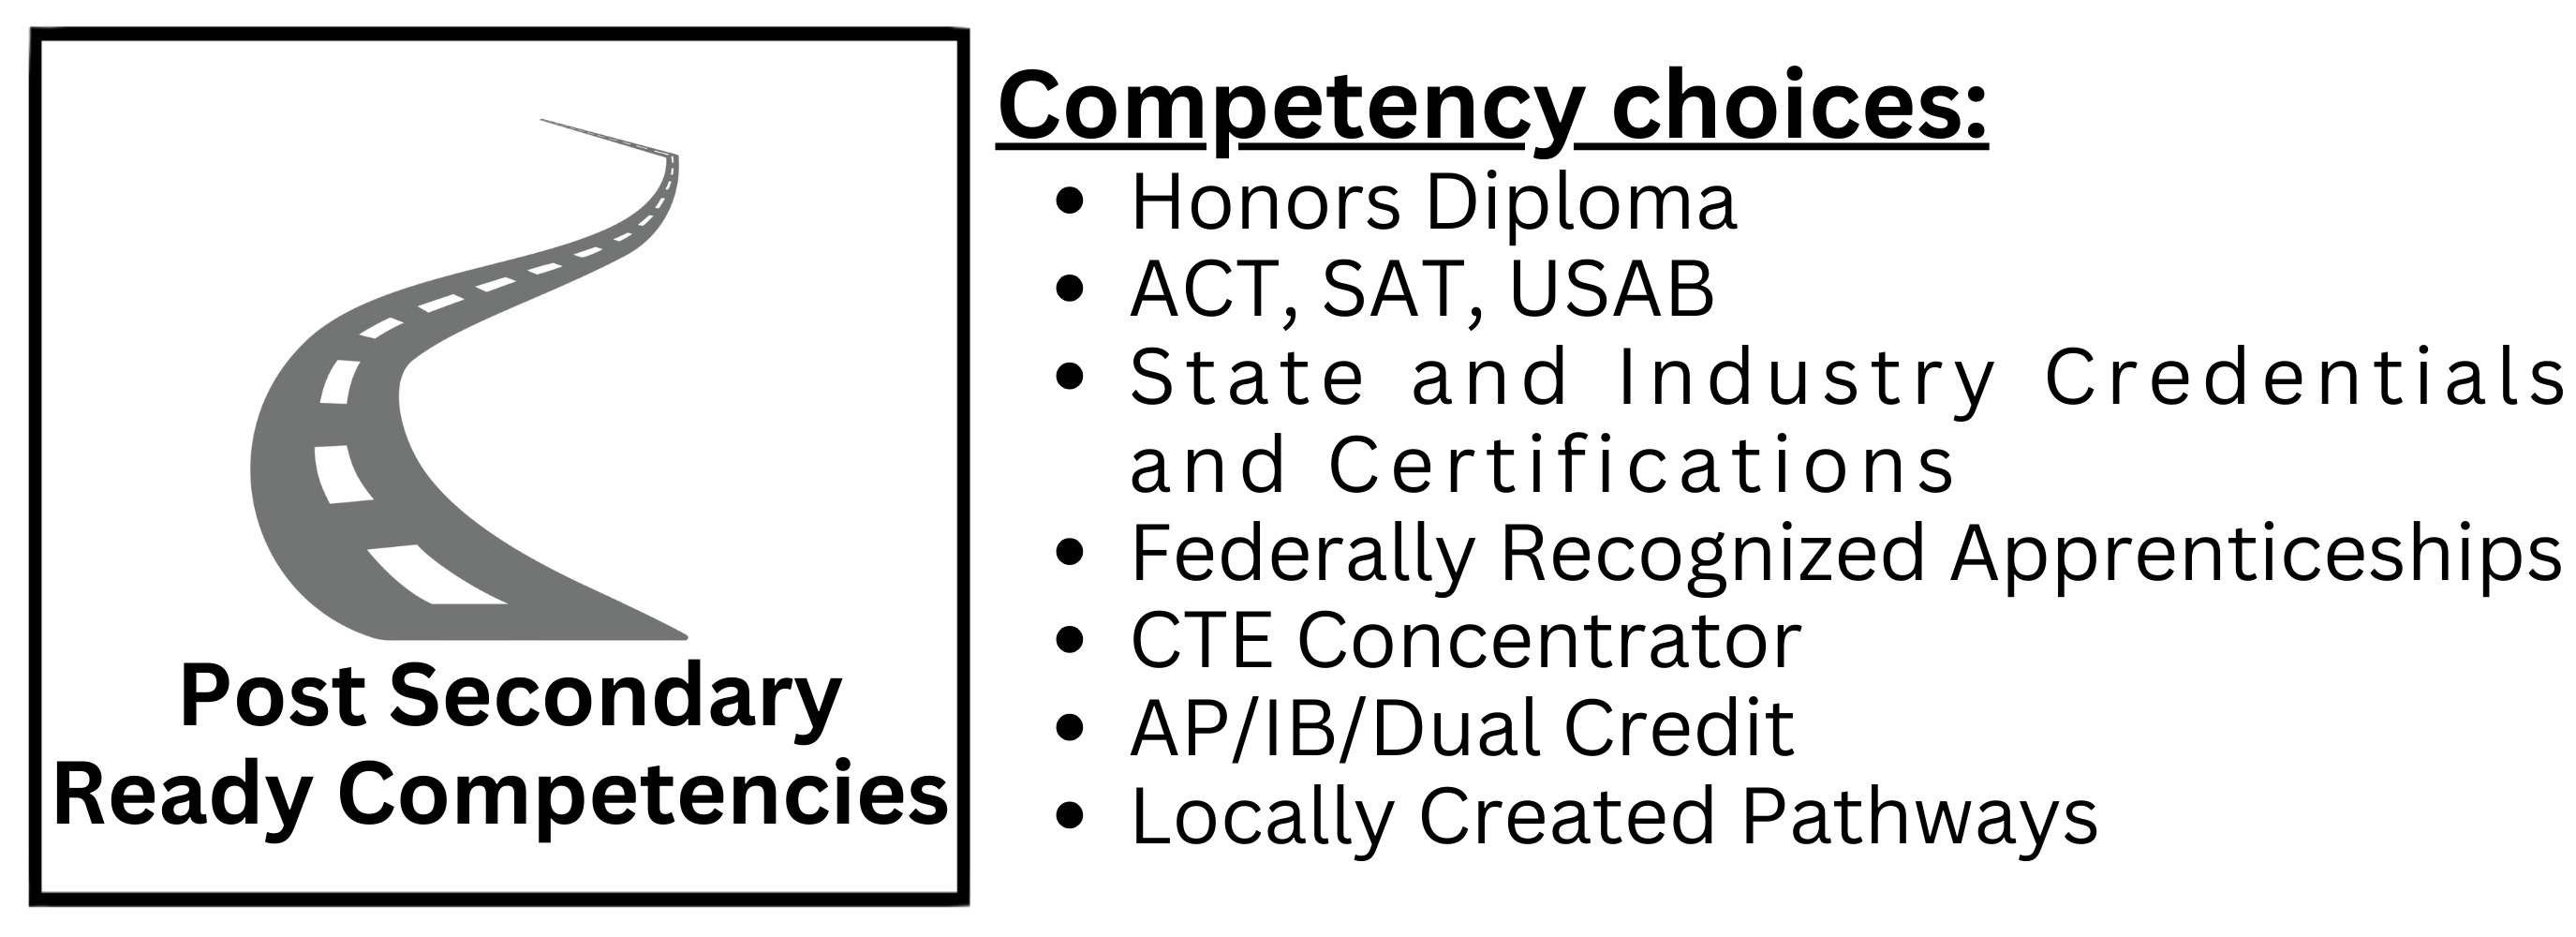 Competency Choices